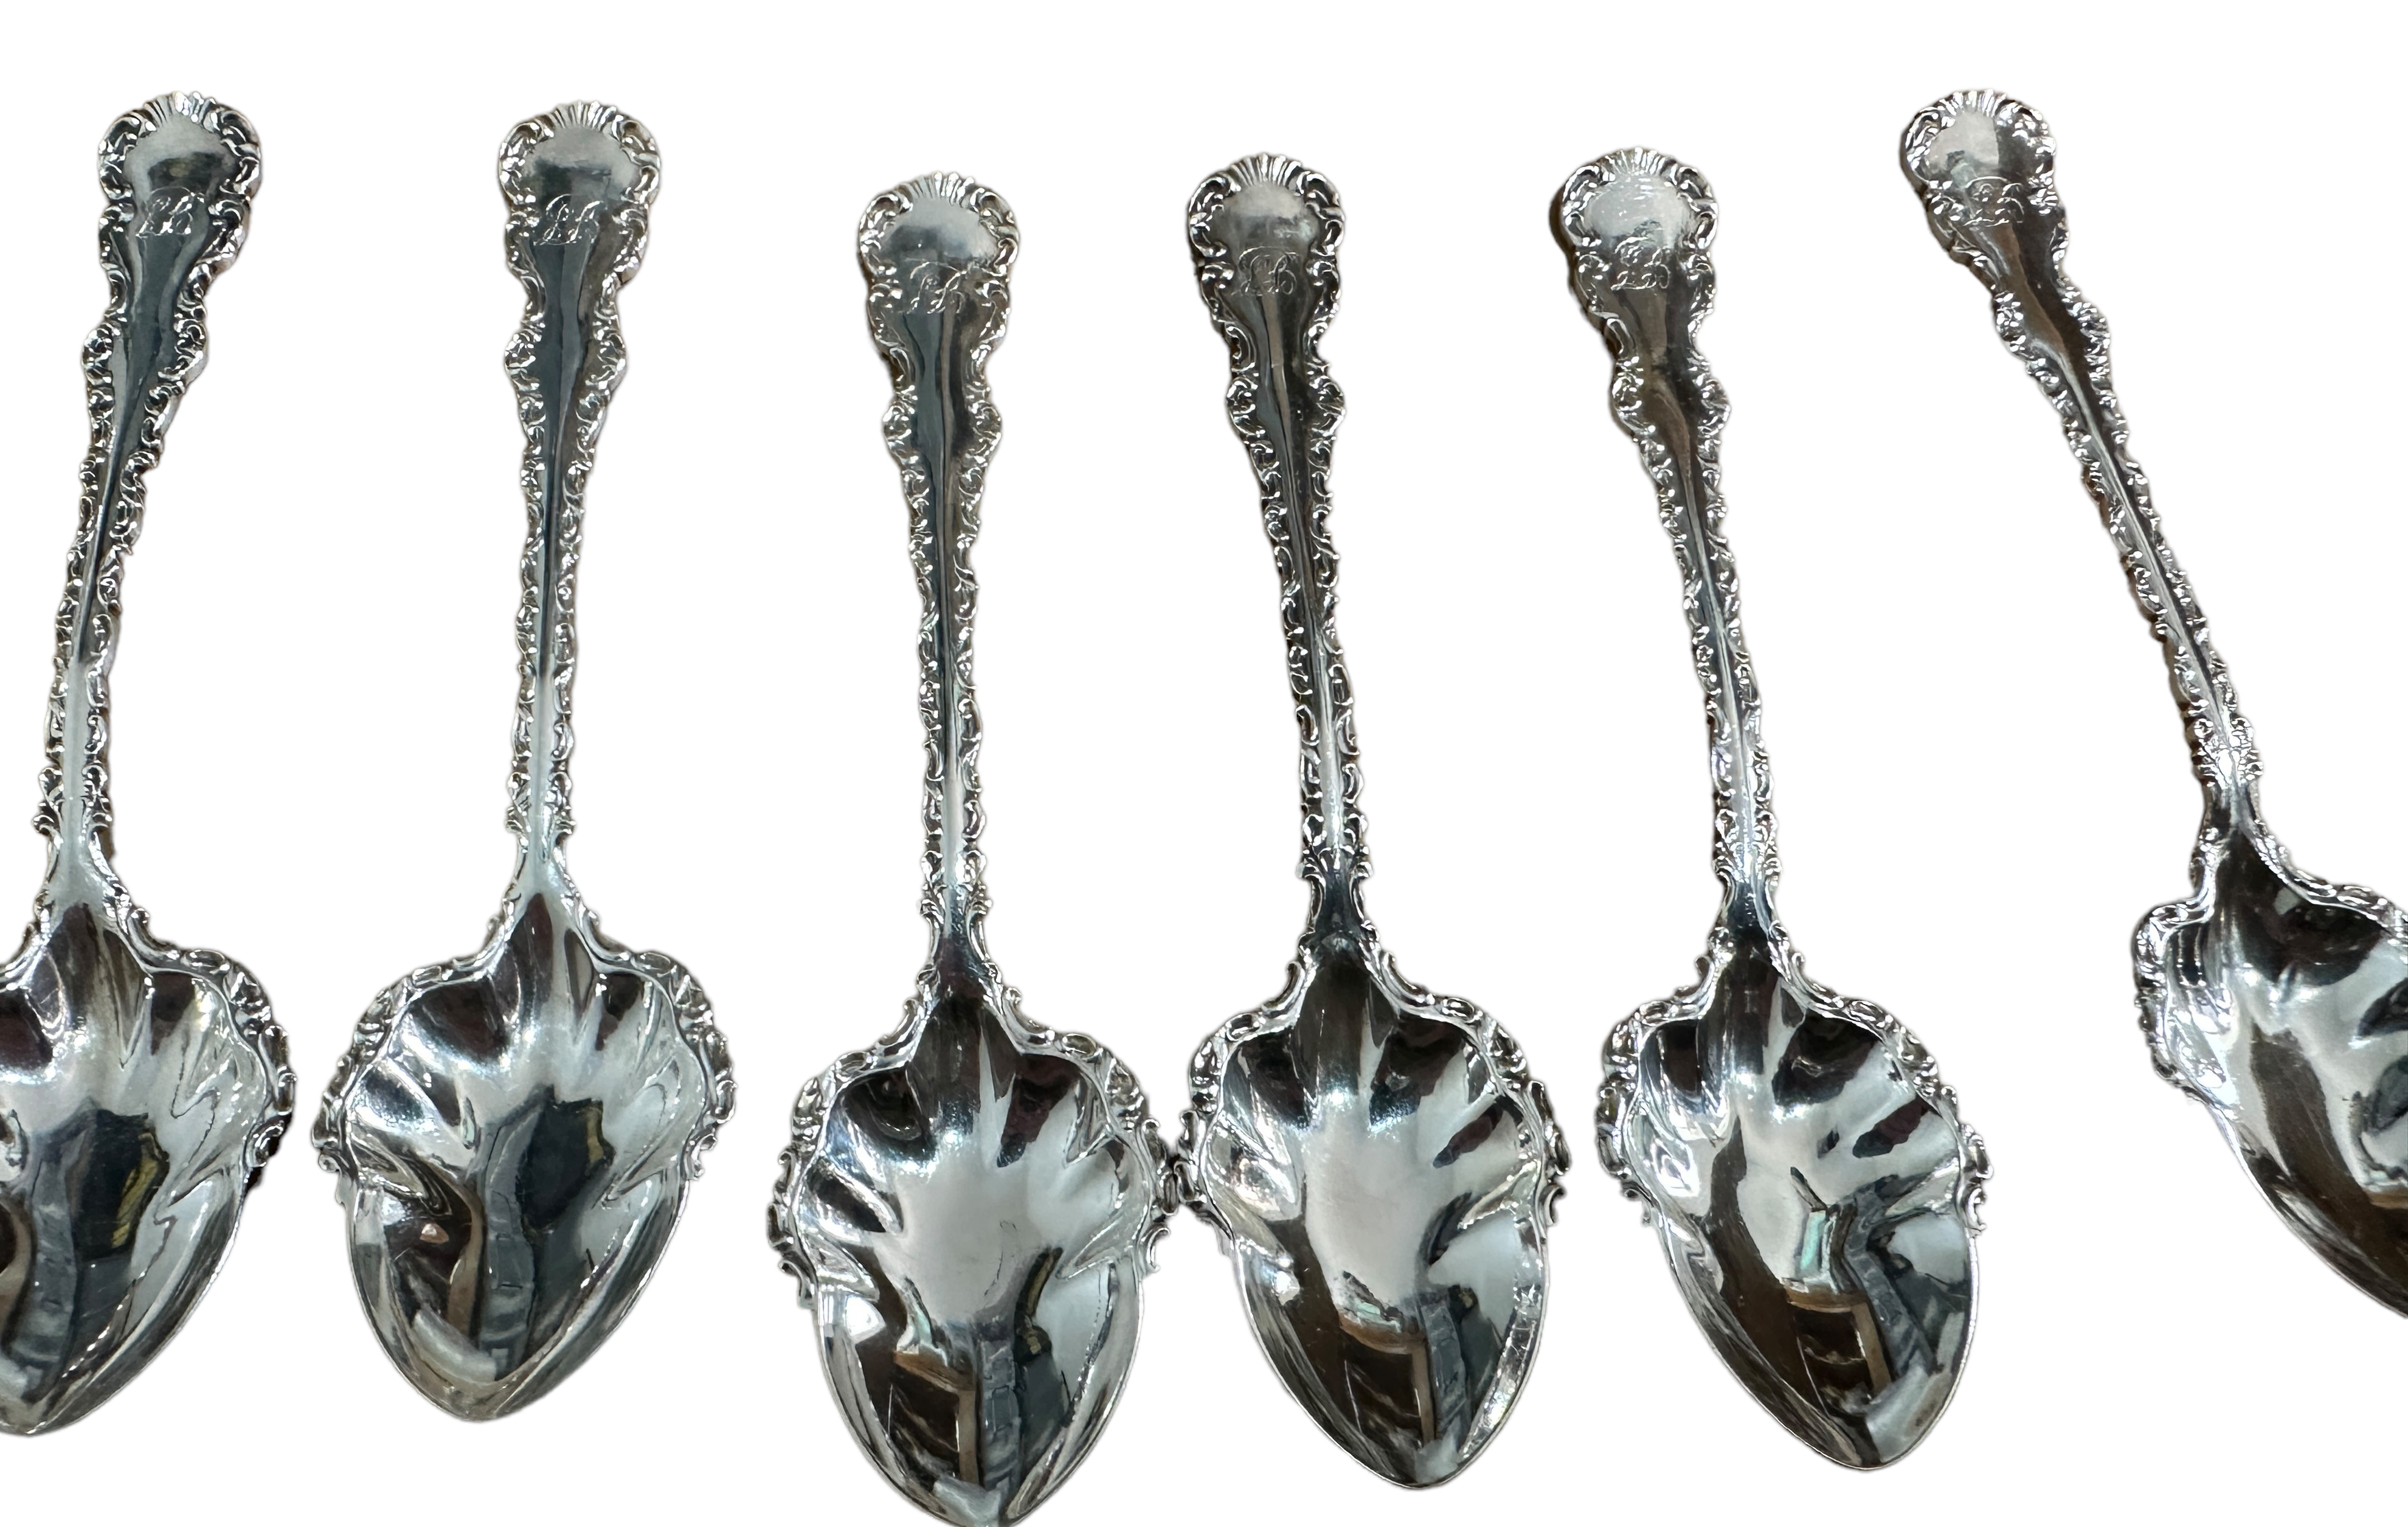 Lot of 12 Decorated Silver Spoons and Silver Tongs - Spoons 11.8 cm long. - Image 2 of 6